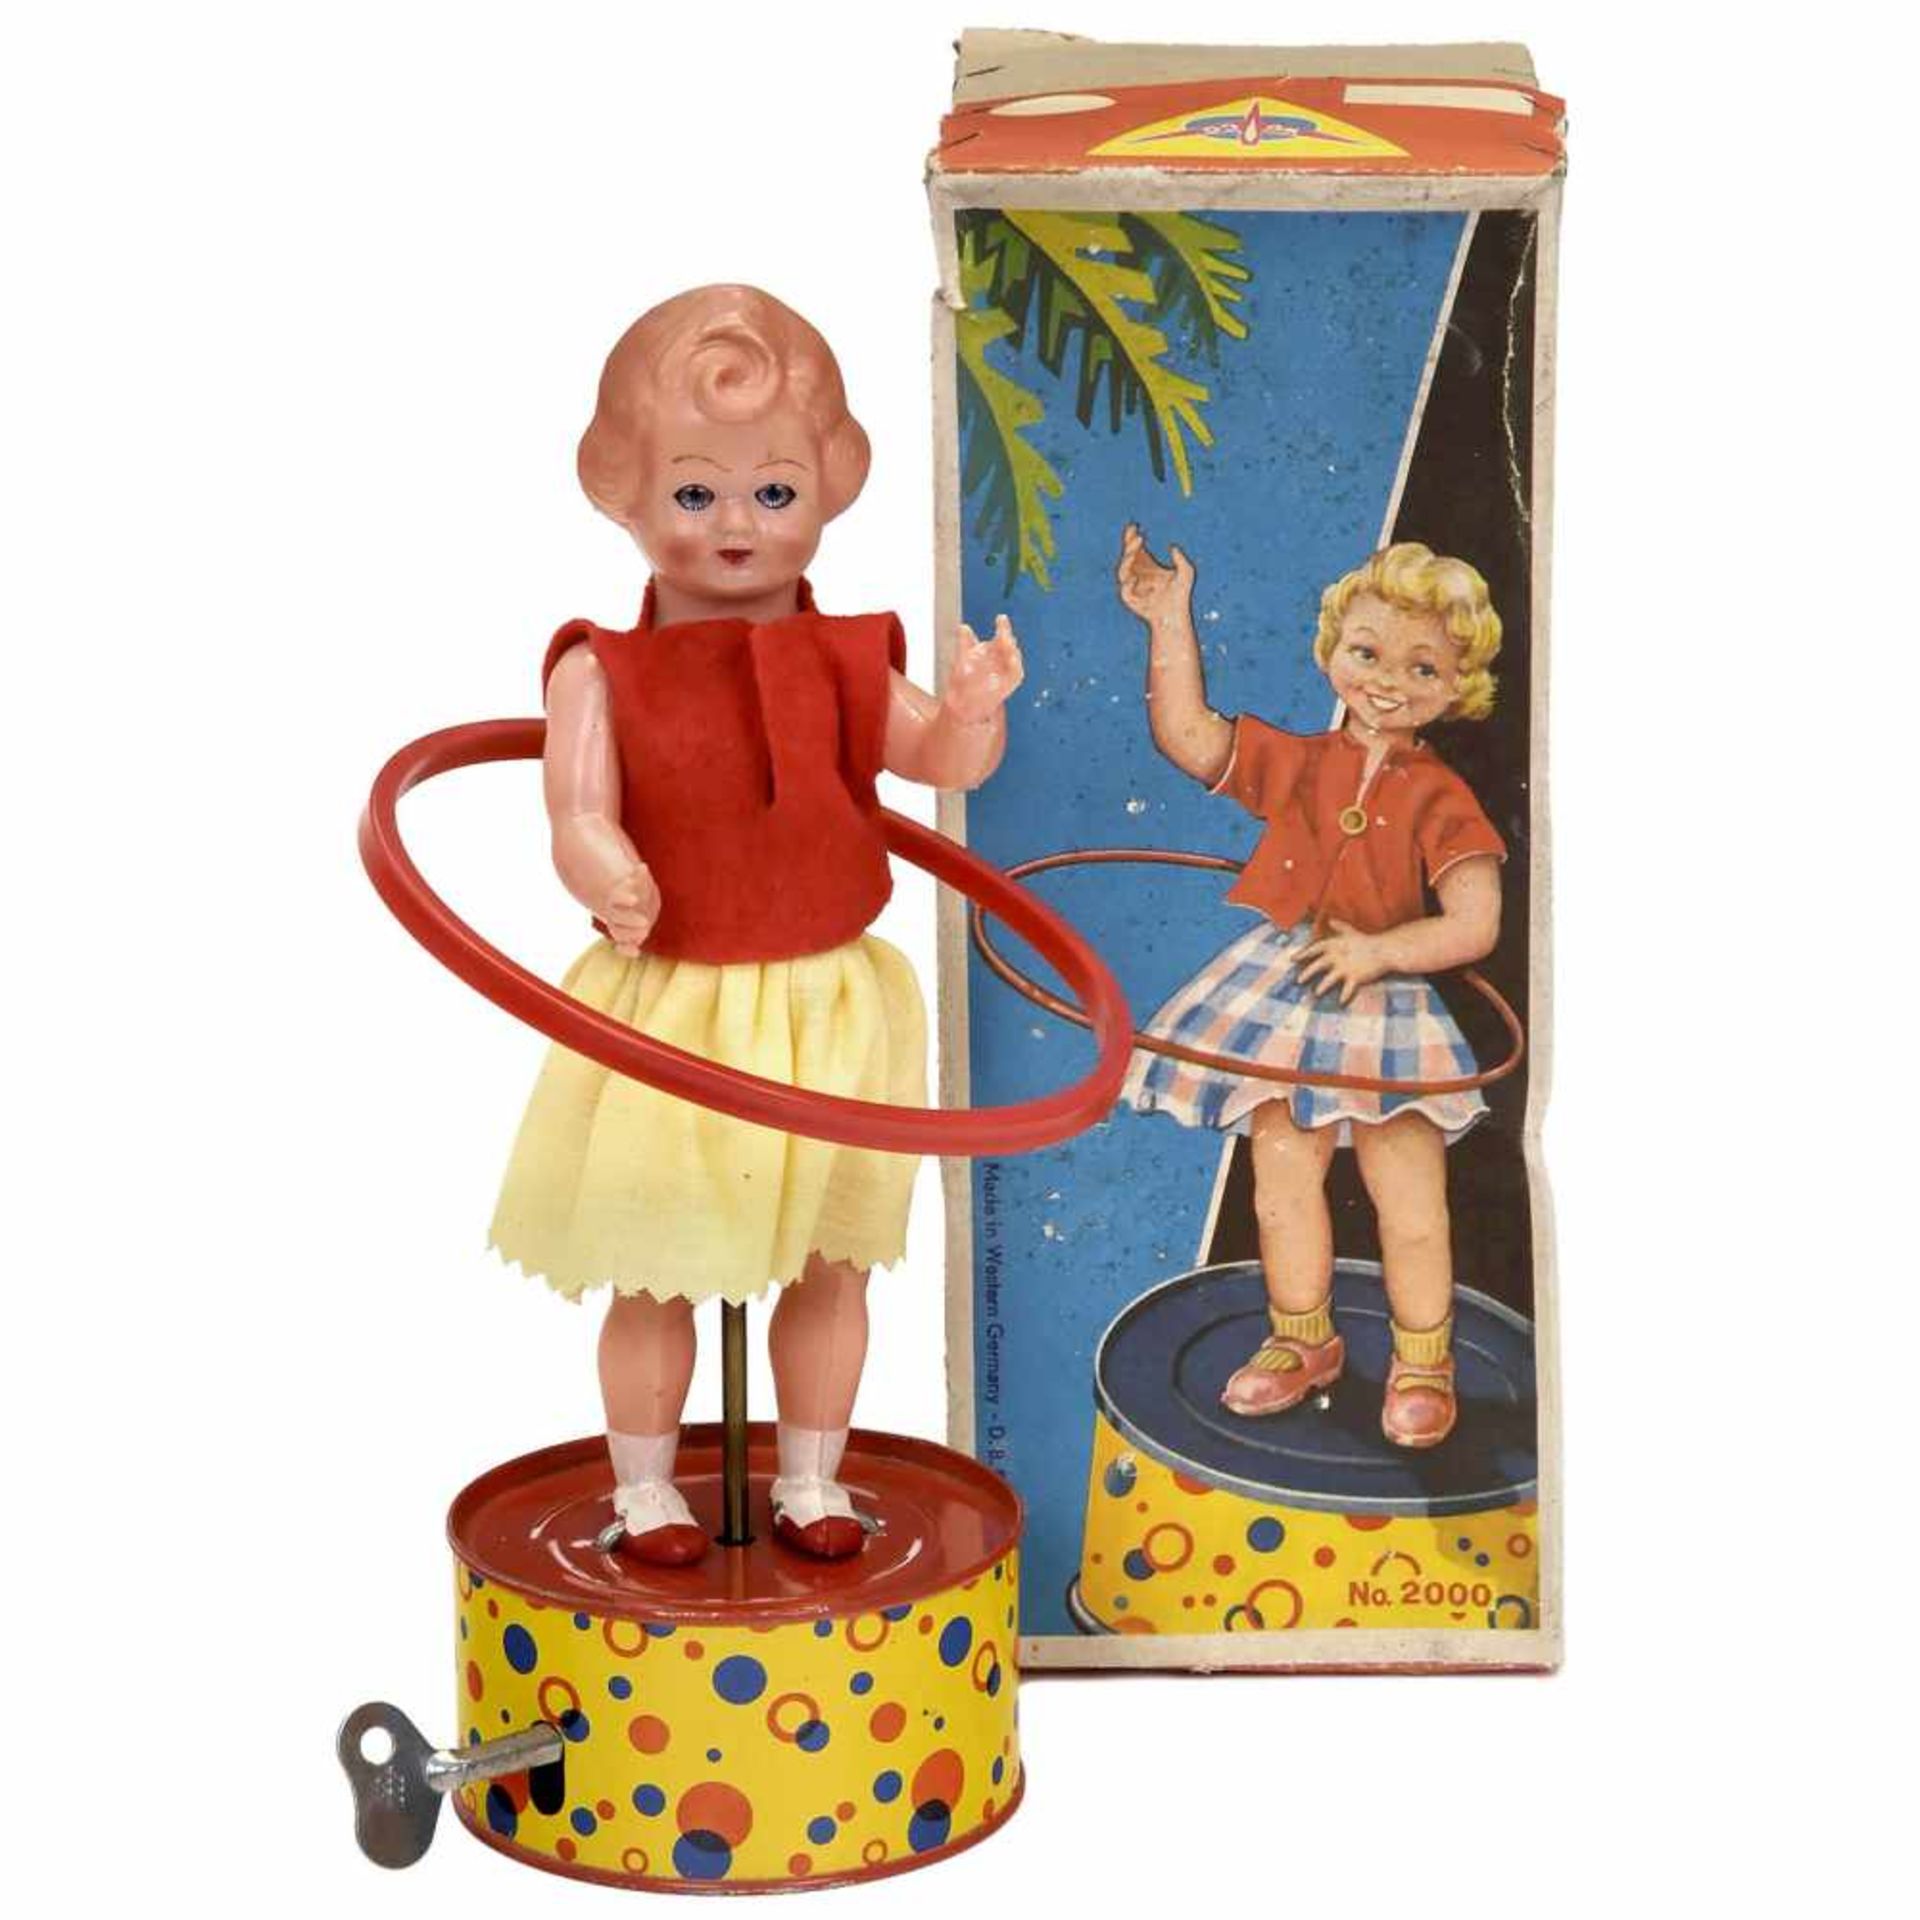 Hula Hoop Doll by Wüco, c. 1958Fritz Wünnerlein & Co, Zirndorf, Germany. No. 2000, lithographed